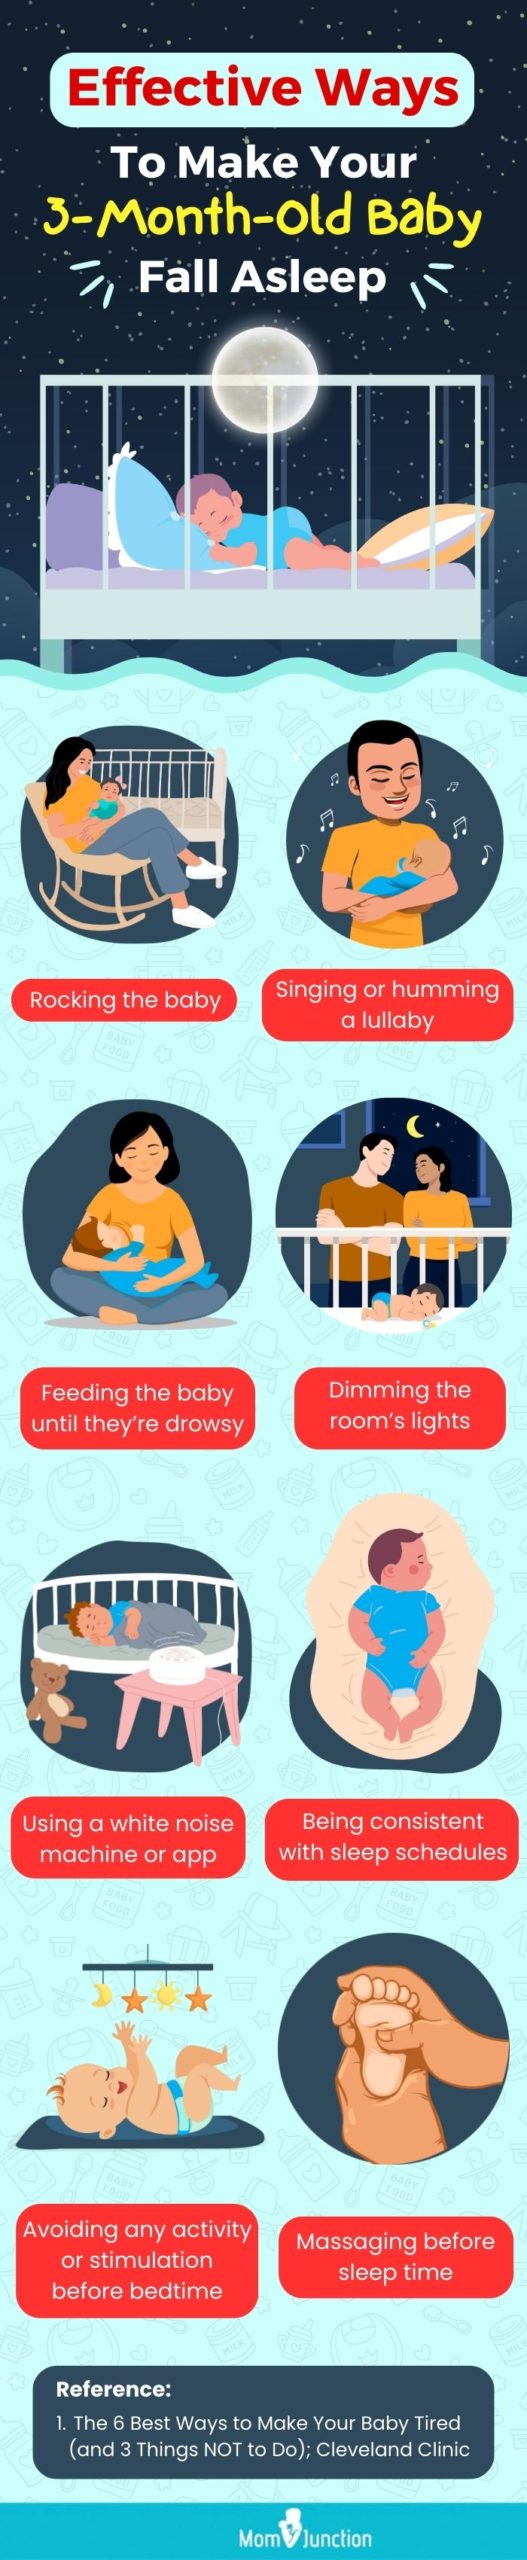 effective ways to make your 3 month old baby fall asleep (infographic) 